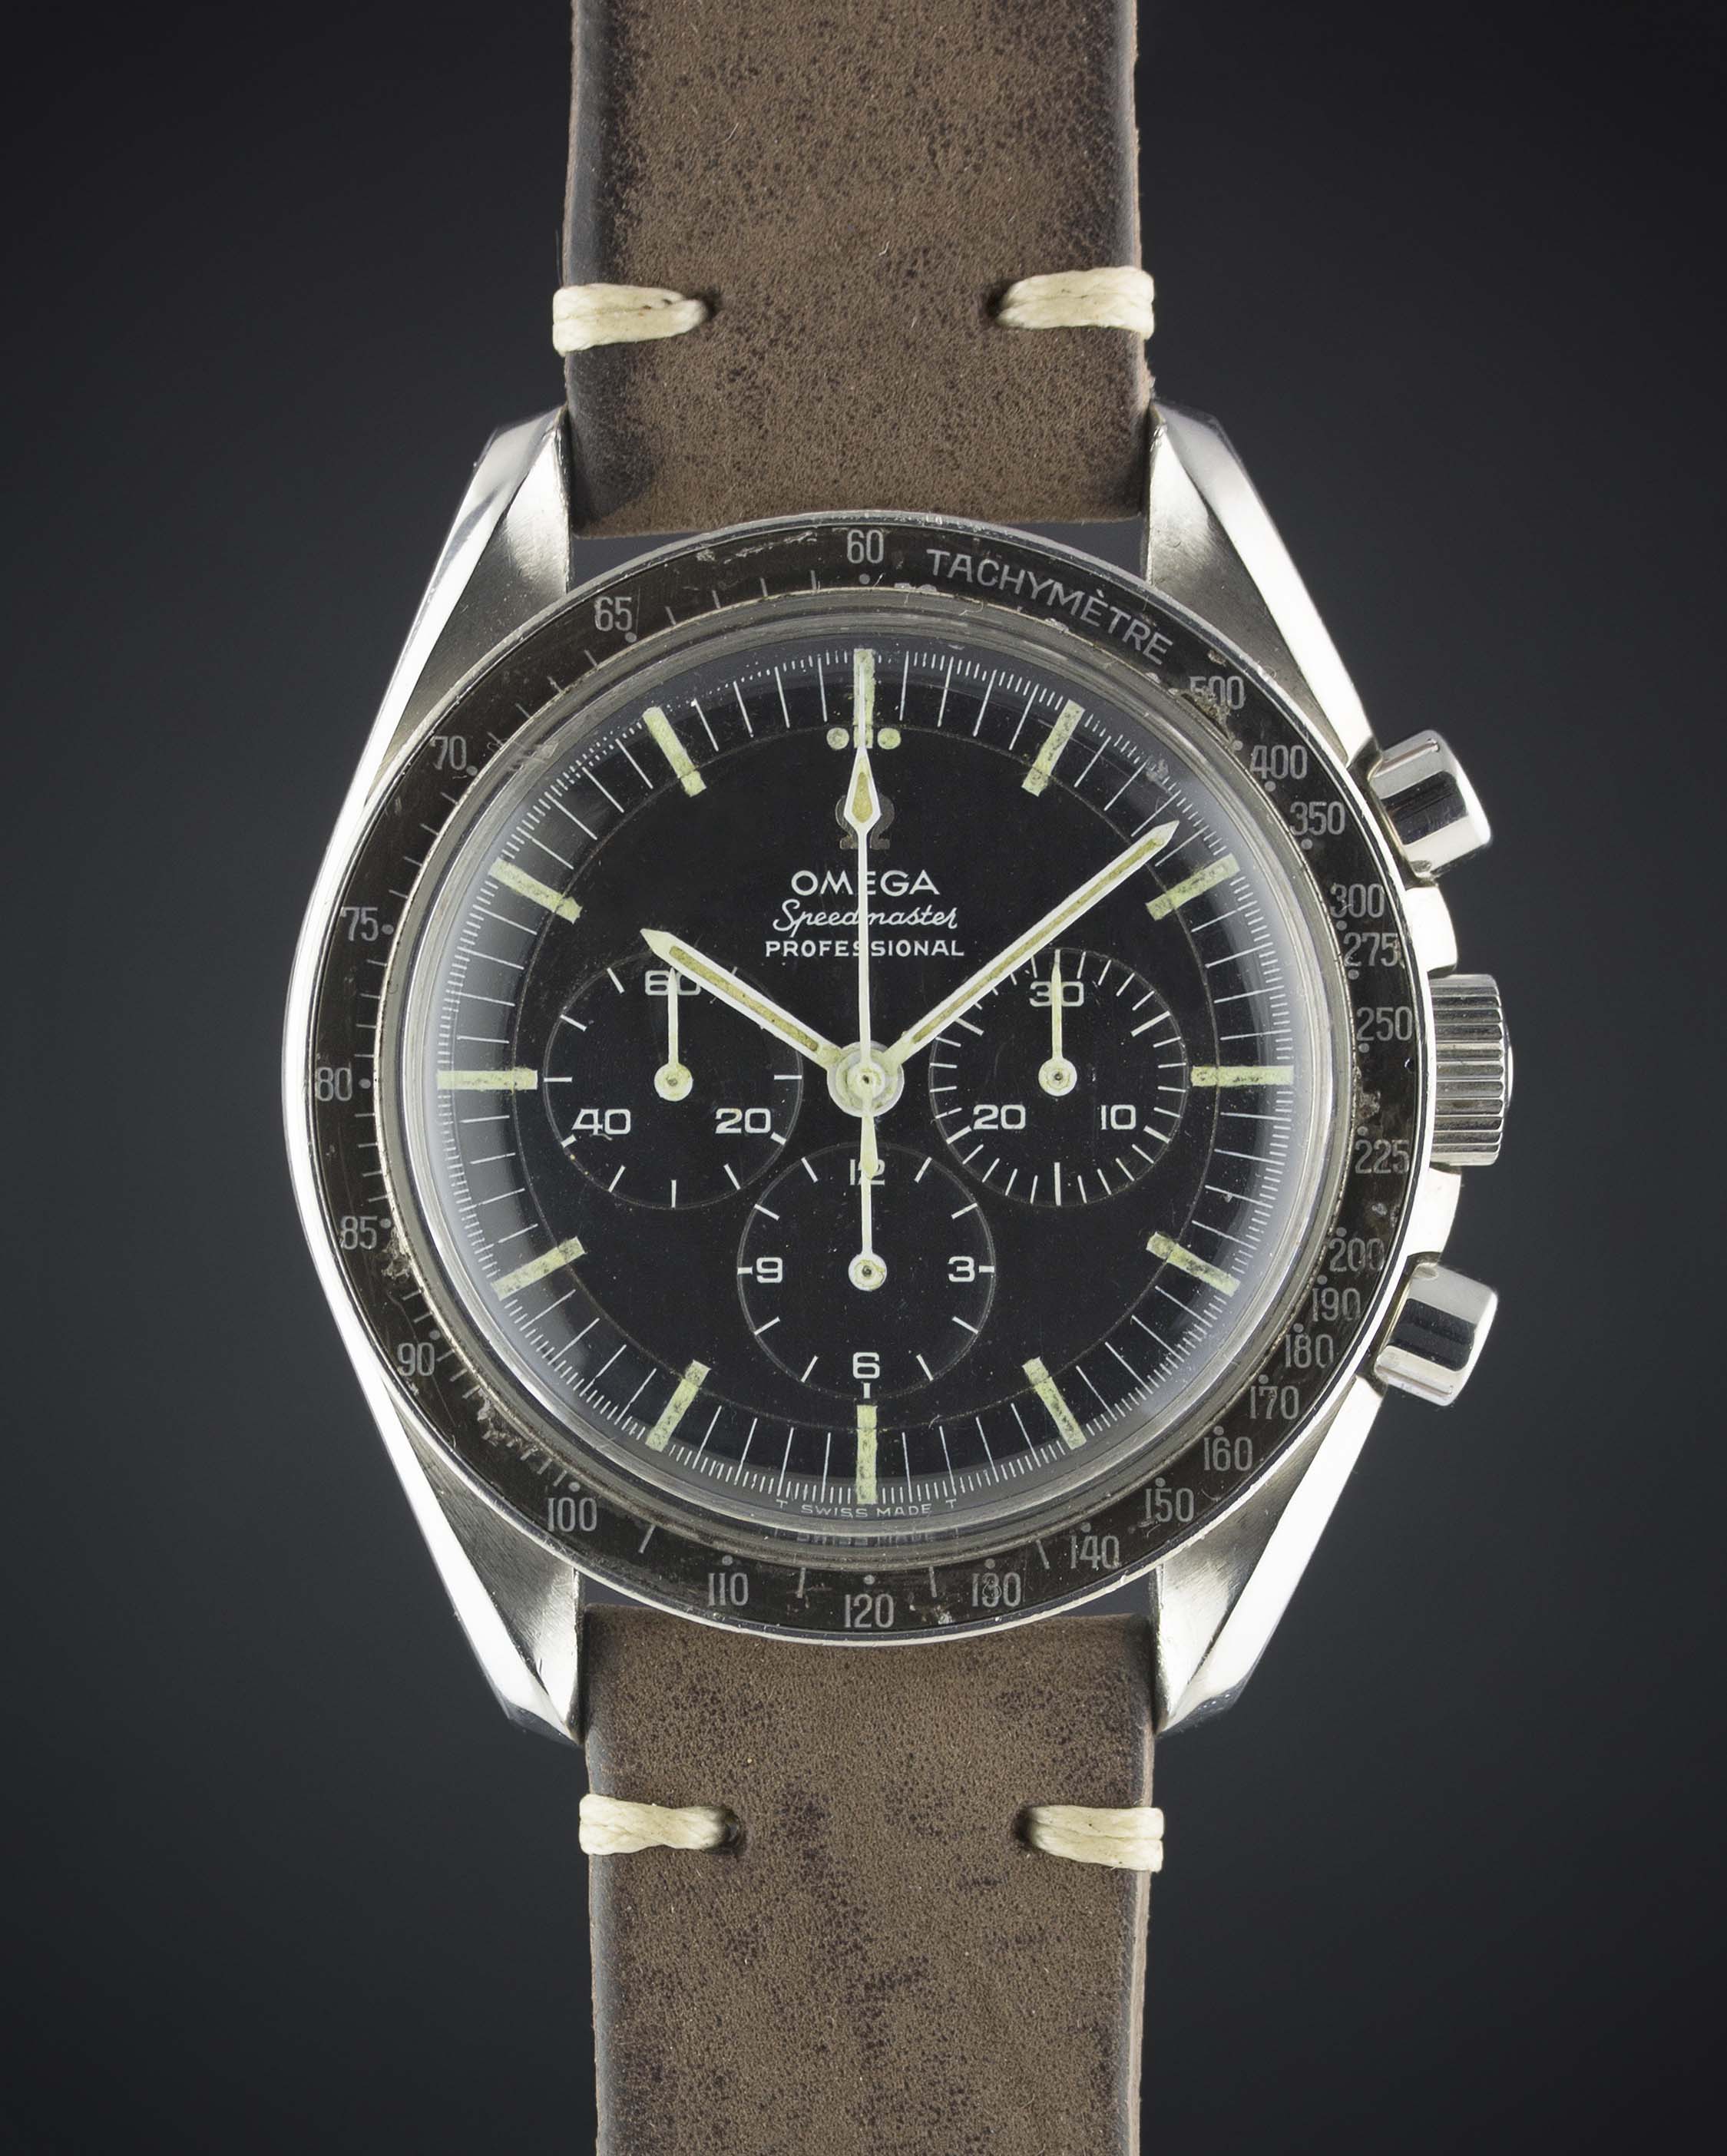 A RARE GENTLEMAN'S STAINLESS STEEL OMEGA SPEEDMASTER PROFESSIONAL "PRE MOON" CHRONOGRAPH WRIST WATCH - Image 2 of 11